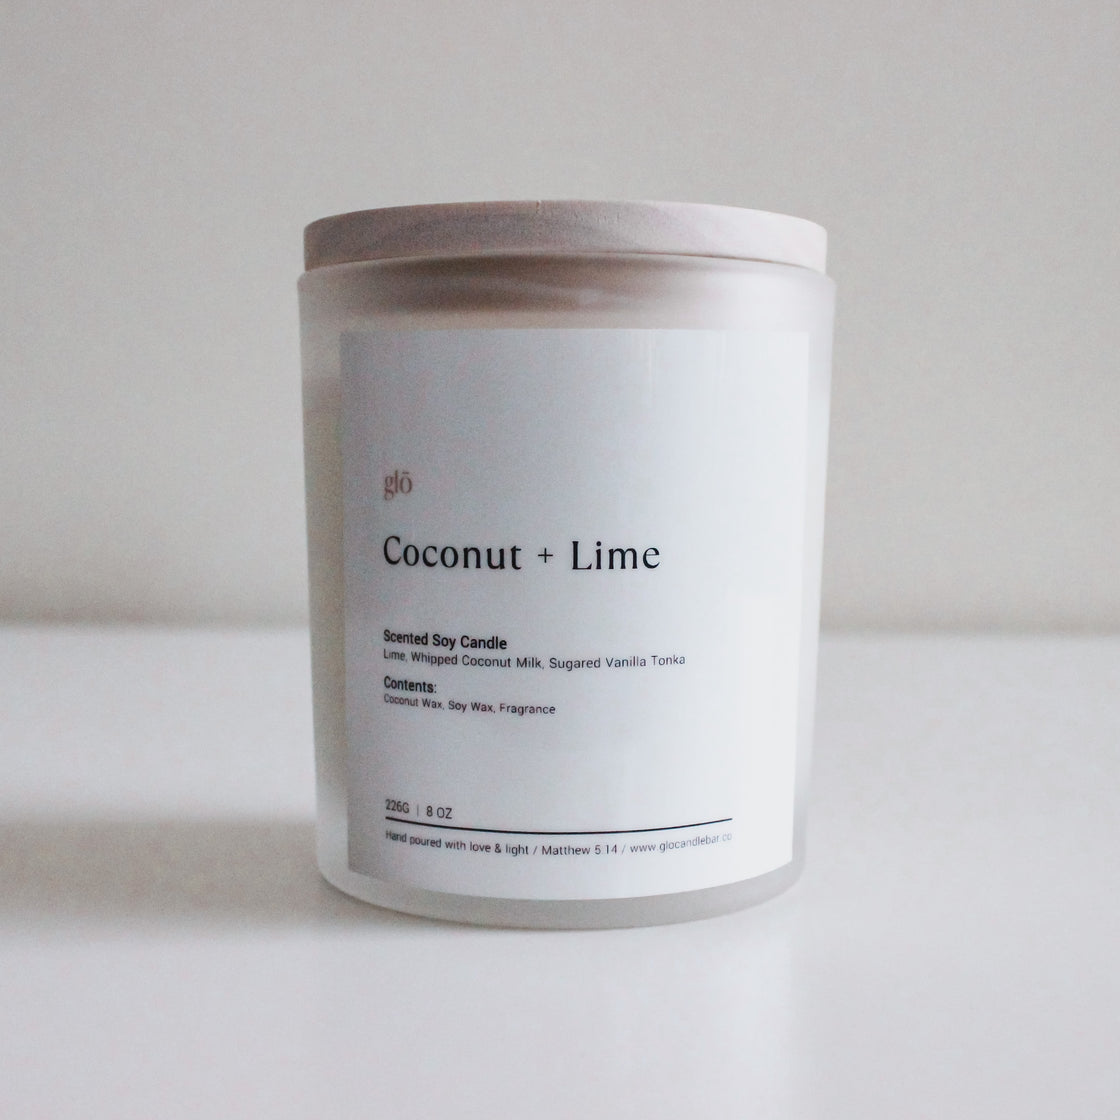 Coconut + Lime